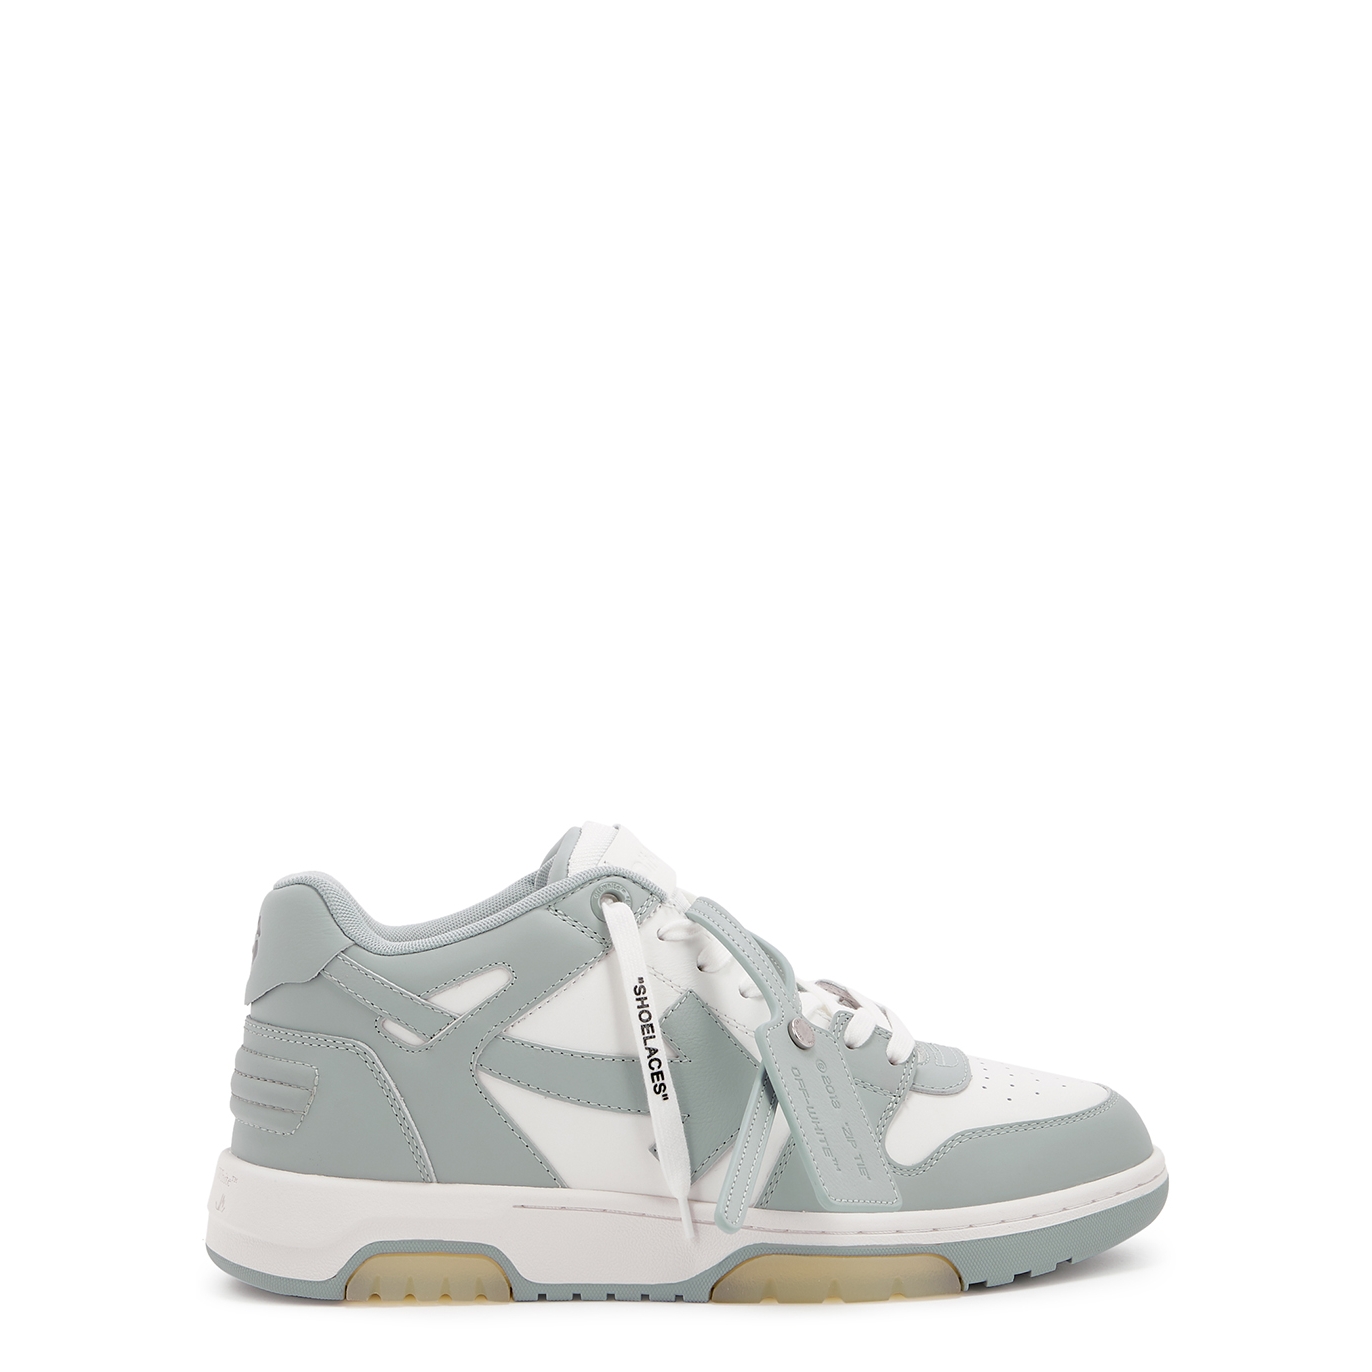 Off-White Out Of Office Panelled Leather Sneakers - White And Grey - 9